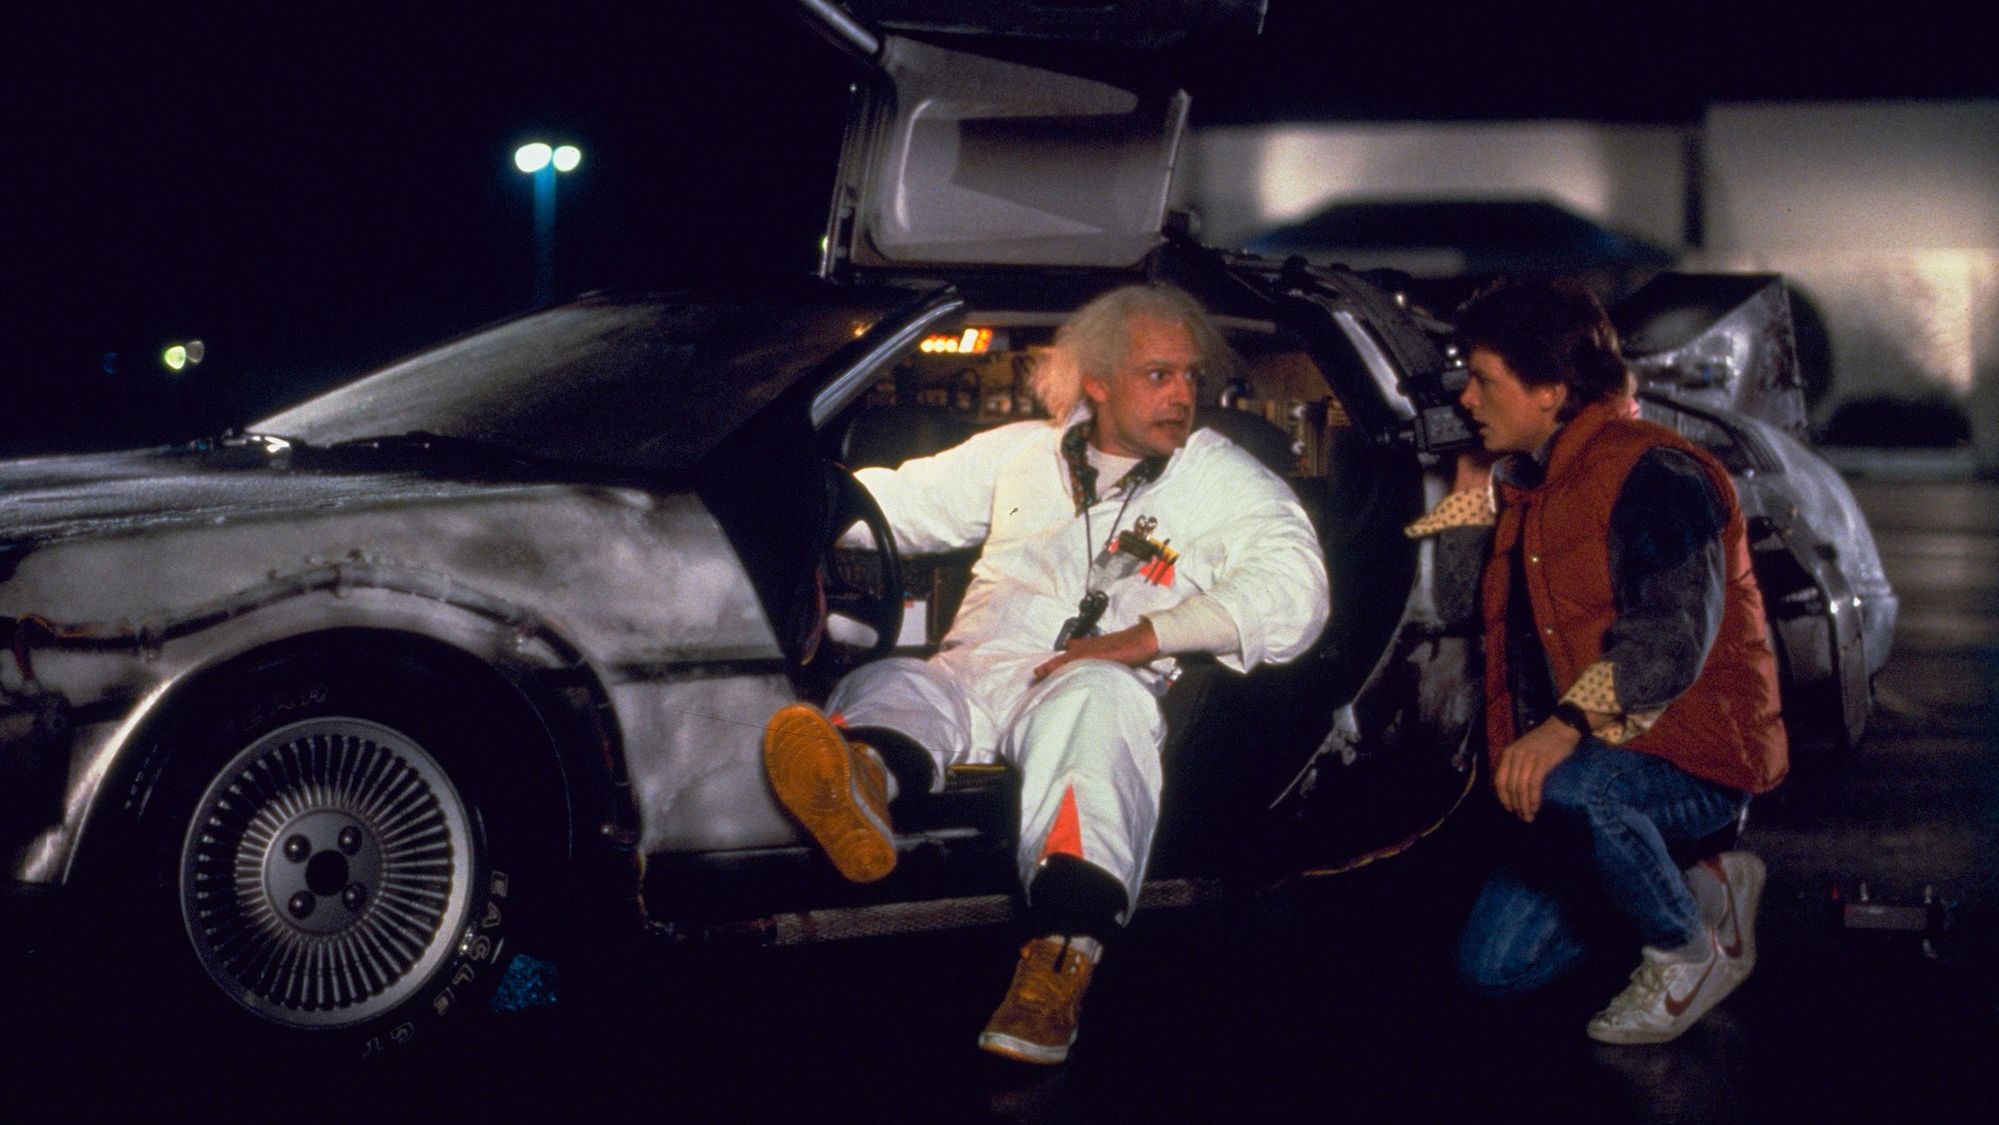 A Time Machine Out Of A DeLorean?